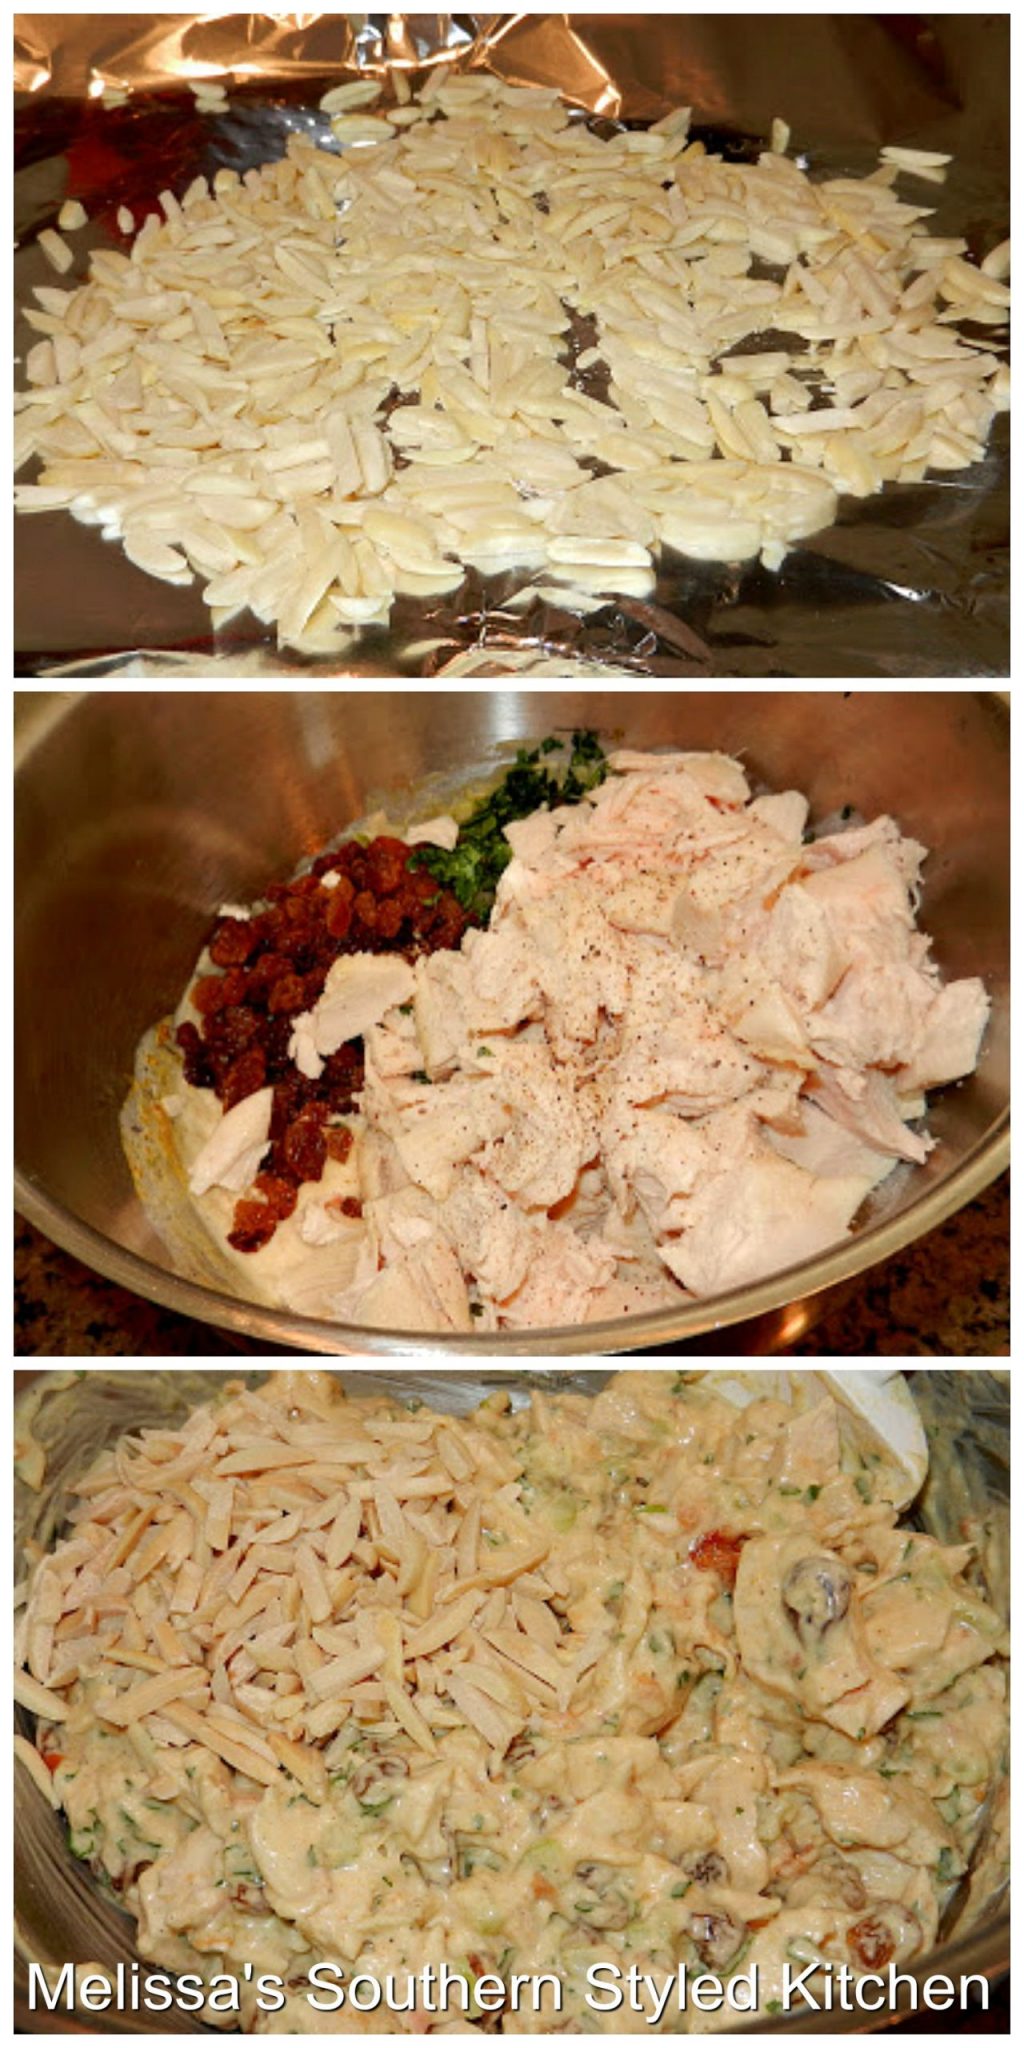 Step-by-step preparation images and ingredients for chicken salad